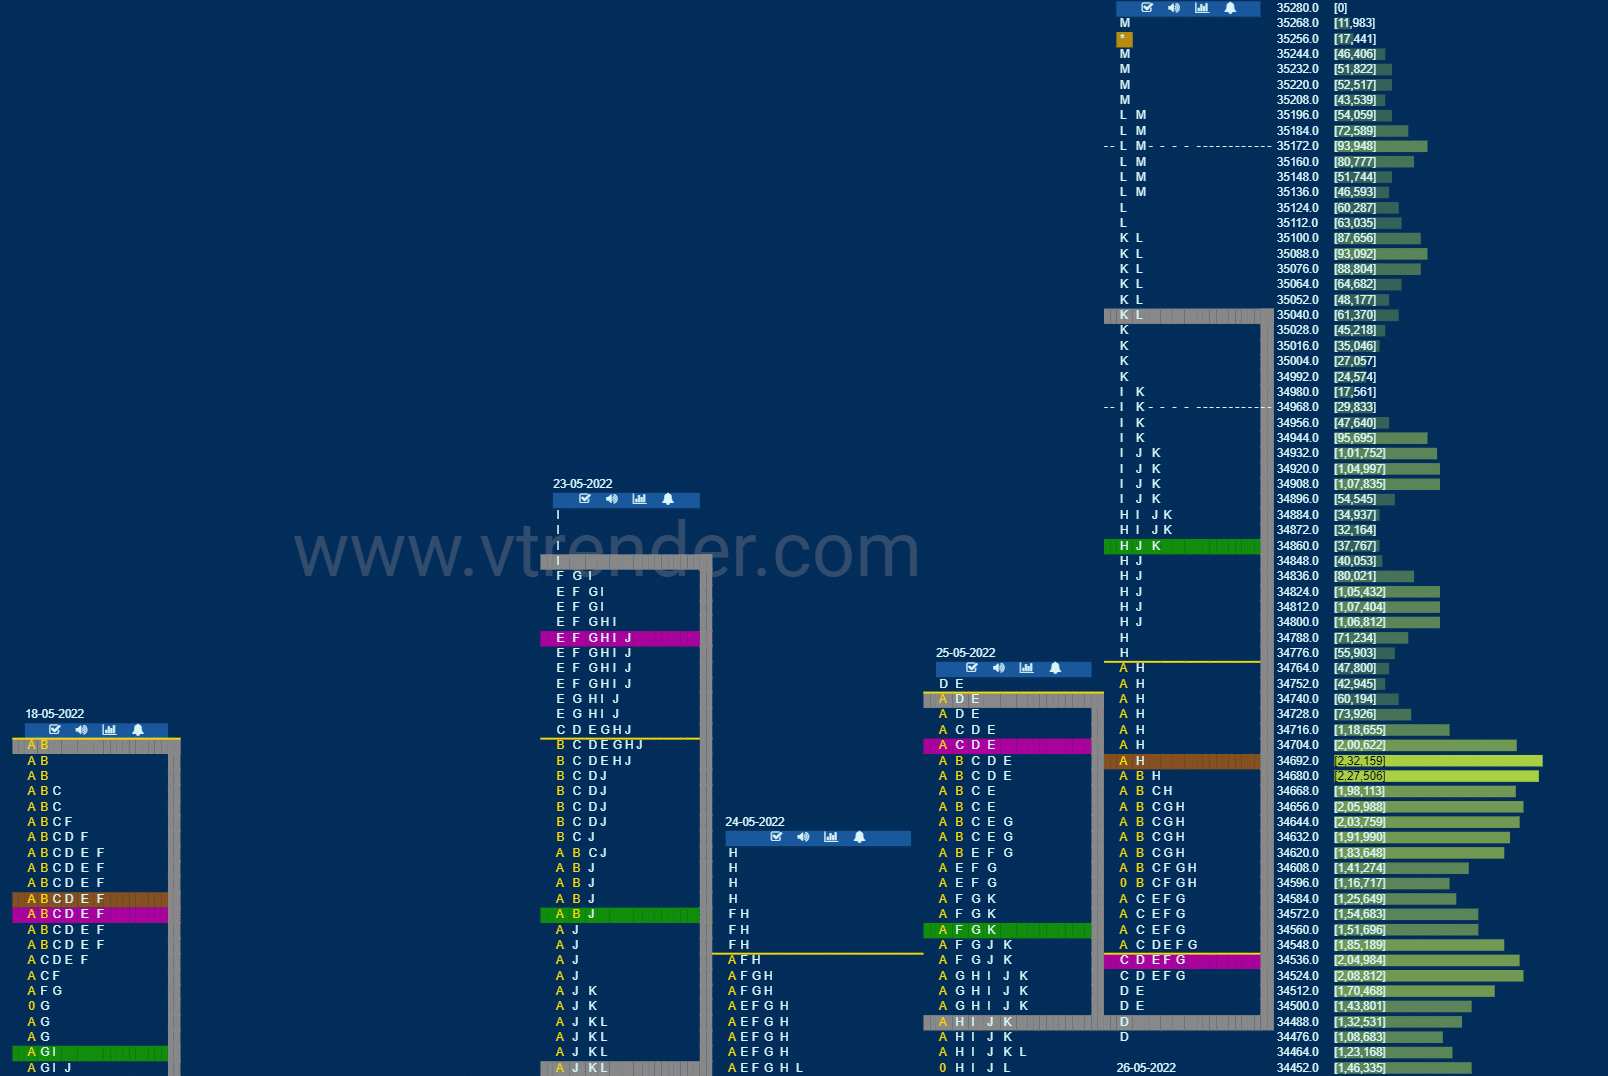 Bnf 18 Market Profile Analysis Dated 26Th May 2022 Banknifty Futures, Charts, Day Trading, Intraday Trading, Intraday Trading Strategies, Market Profile, Market Profile Trading Strategies, Nifty Futures, Order Flow Analysis, Support And Resistance, Technical Analysis, Trading Strategies, Volume Profile Trading